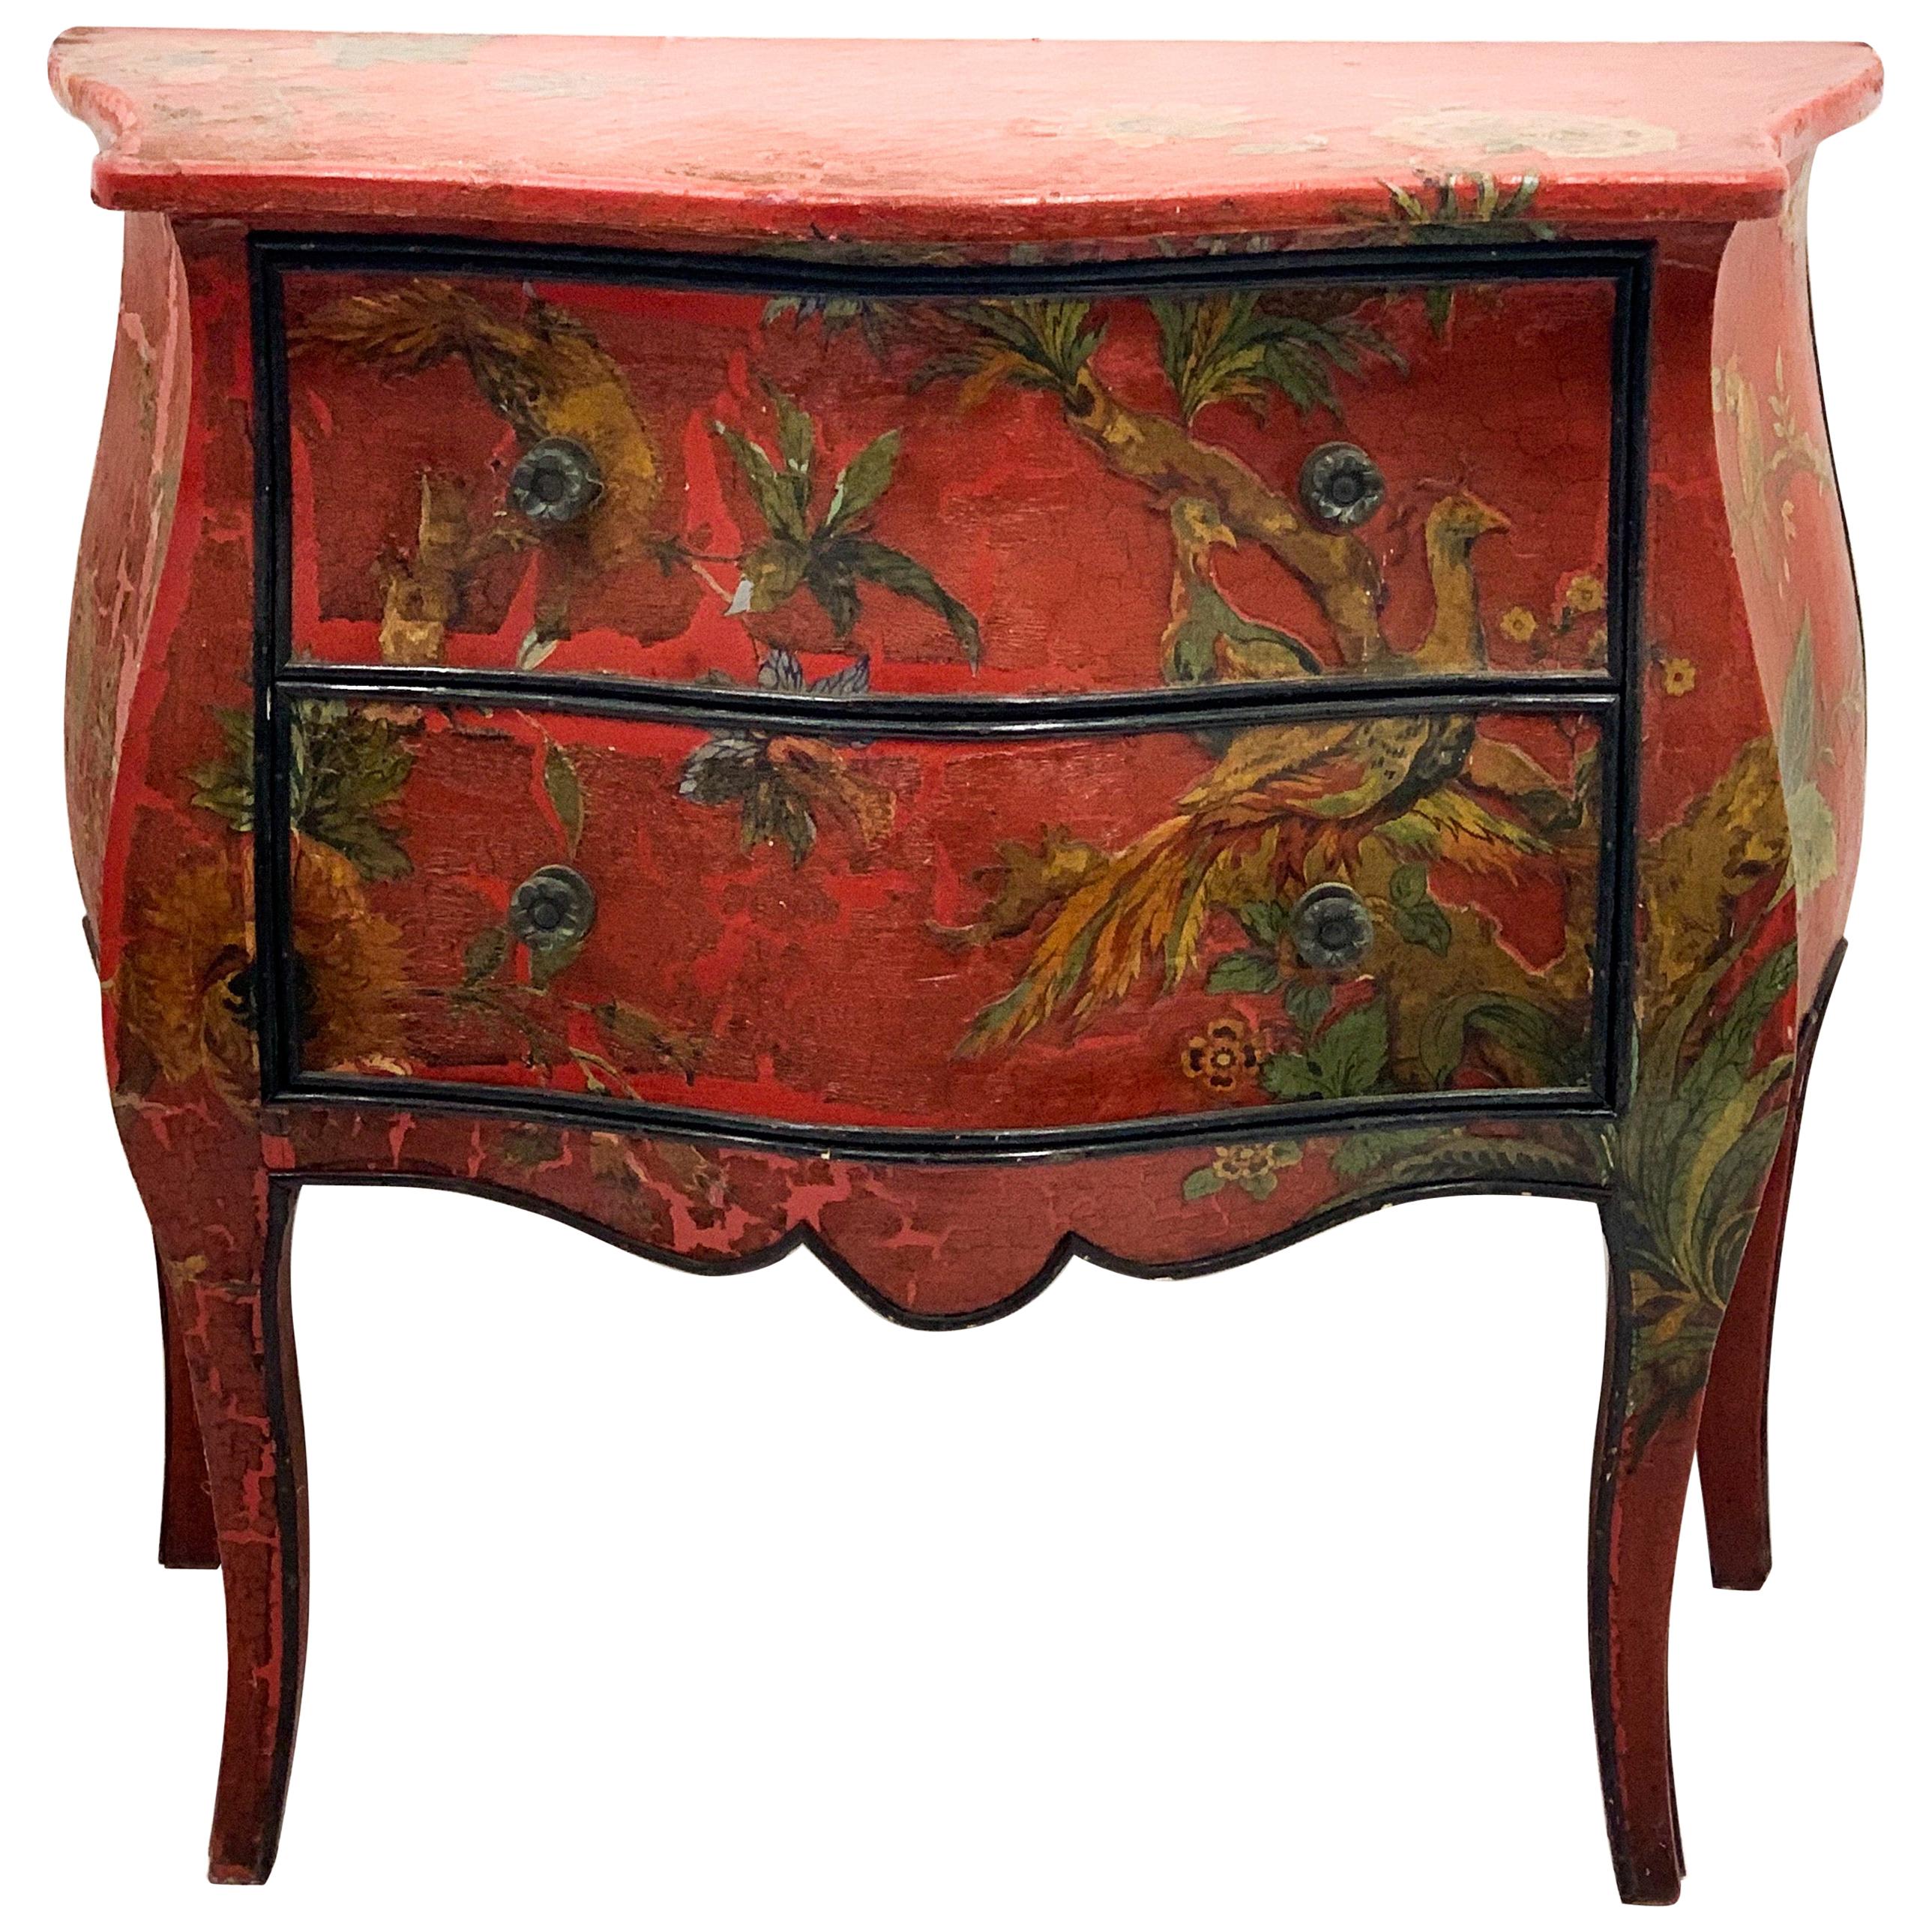 Antique French Red Chinoiserie Bombe Chest of Drawers with Decoupage